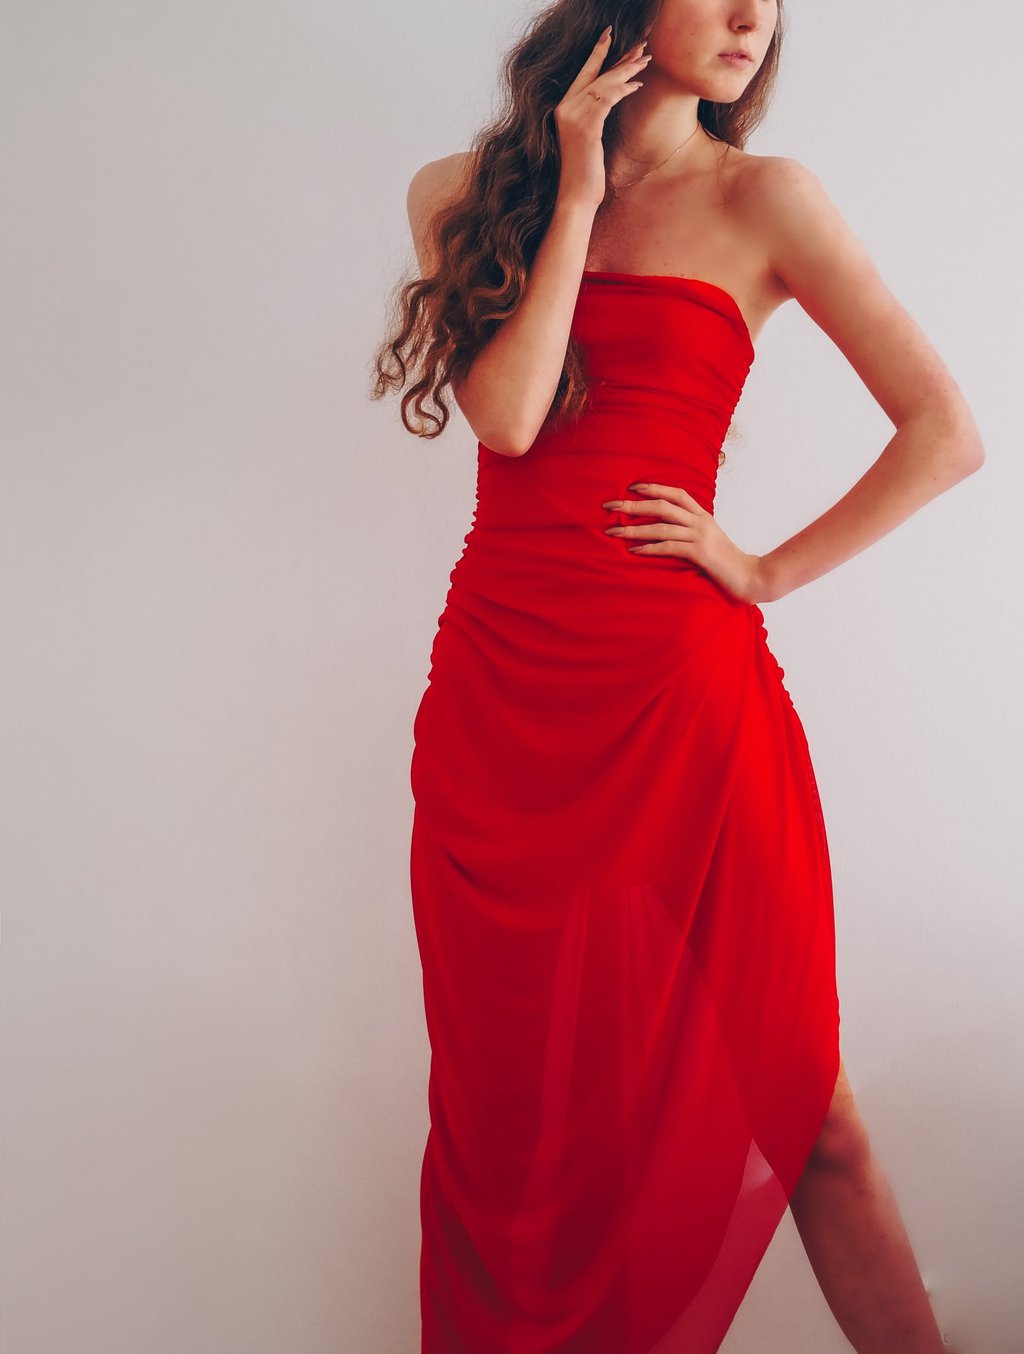 How to Accessorize a Red Dress - Dress for the Wedding  Red dress  accessories, Red dress outfit, Red dress party